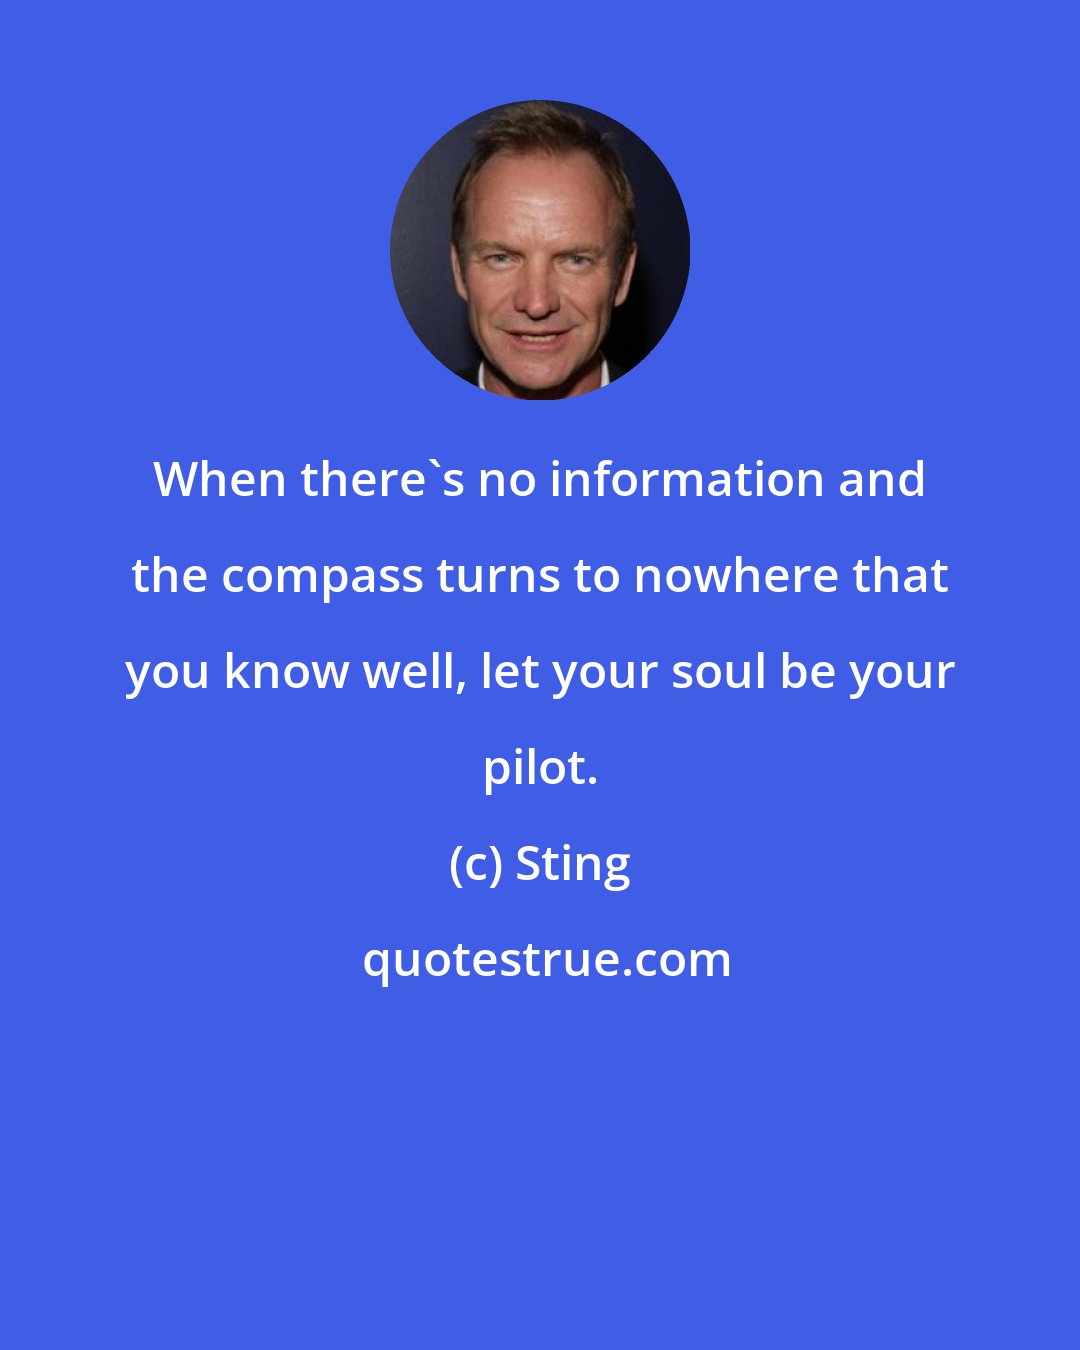 Sting: When there's no information and the compass turns to nowhere that you know well, let your soul be your pilot.